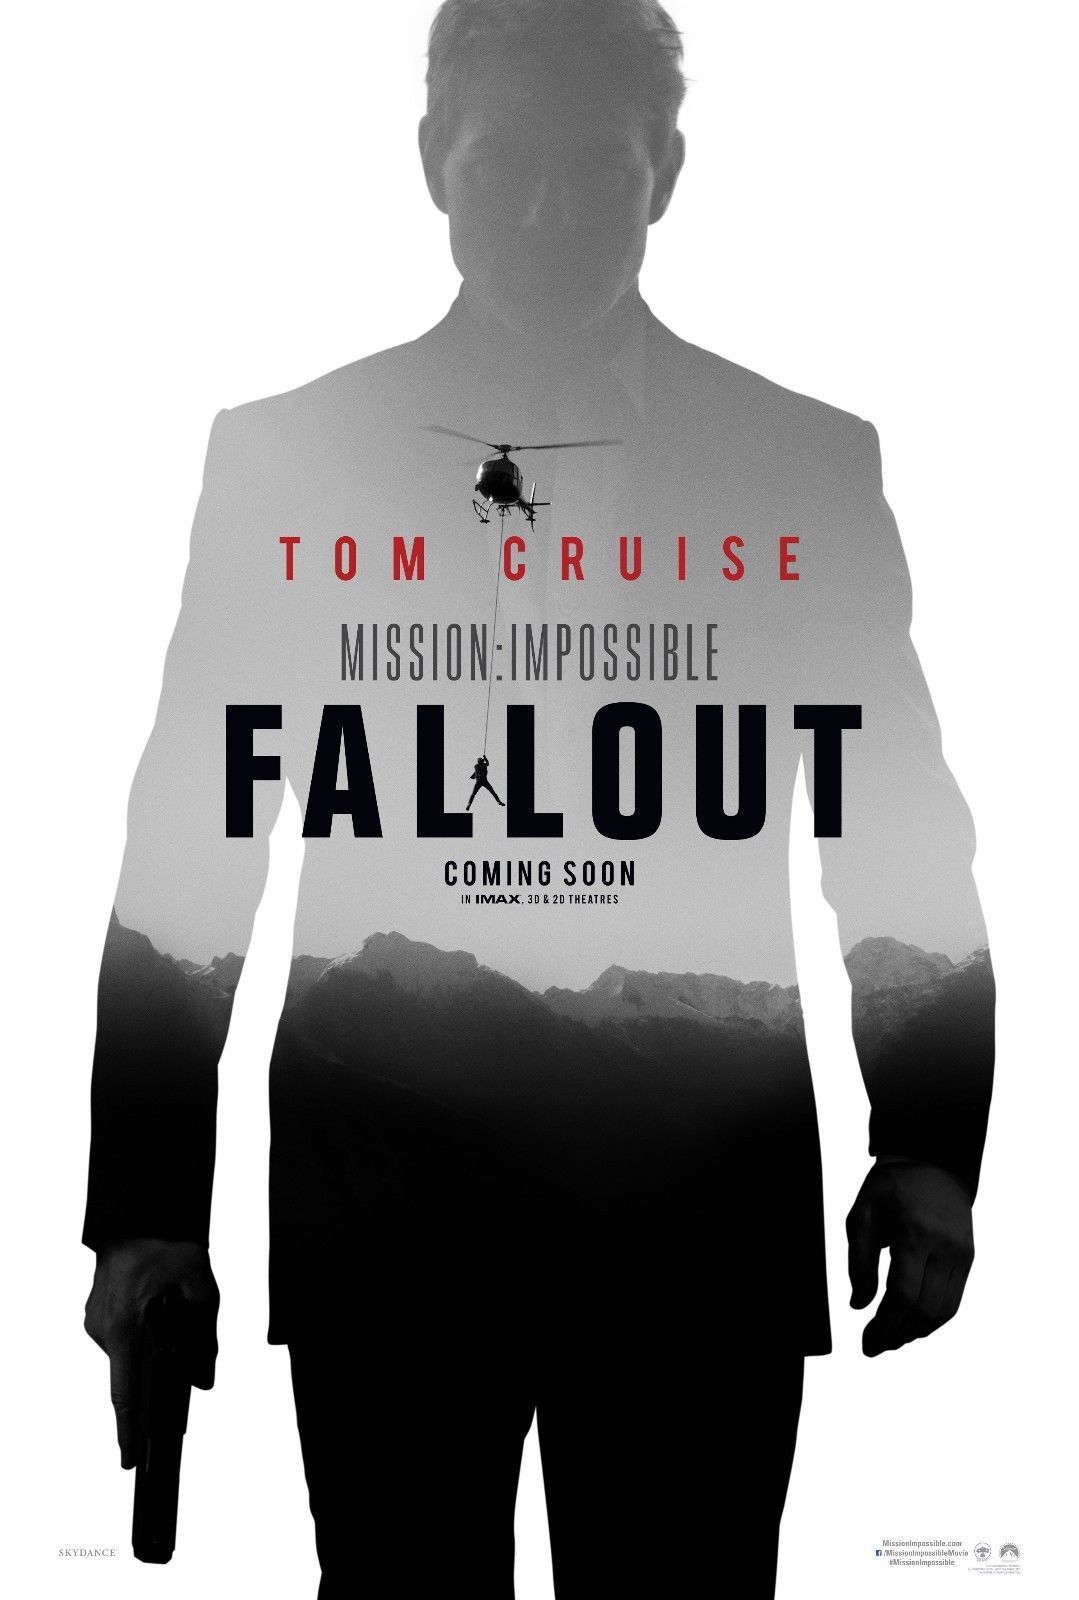 Mission Impossible Fallout Movie Poster Tom Cruise Art Print 13X20" 27x40" 32x48 - $10.88 - $18.71